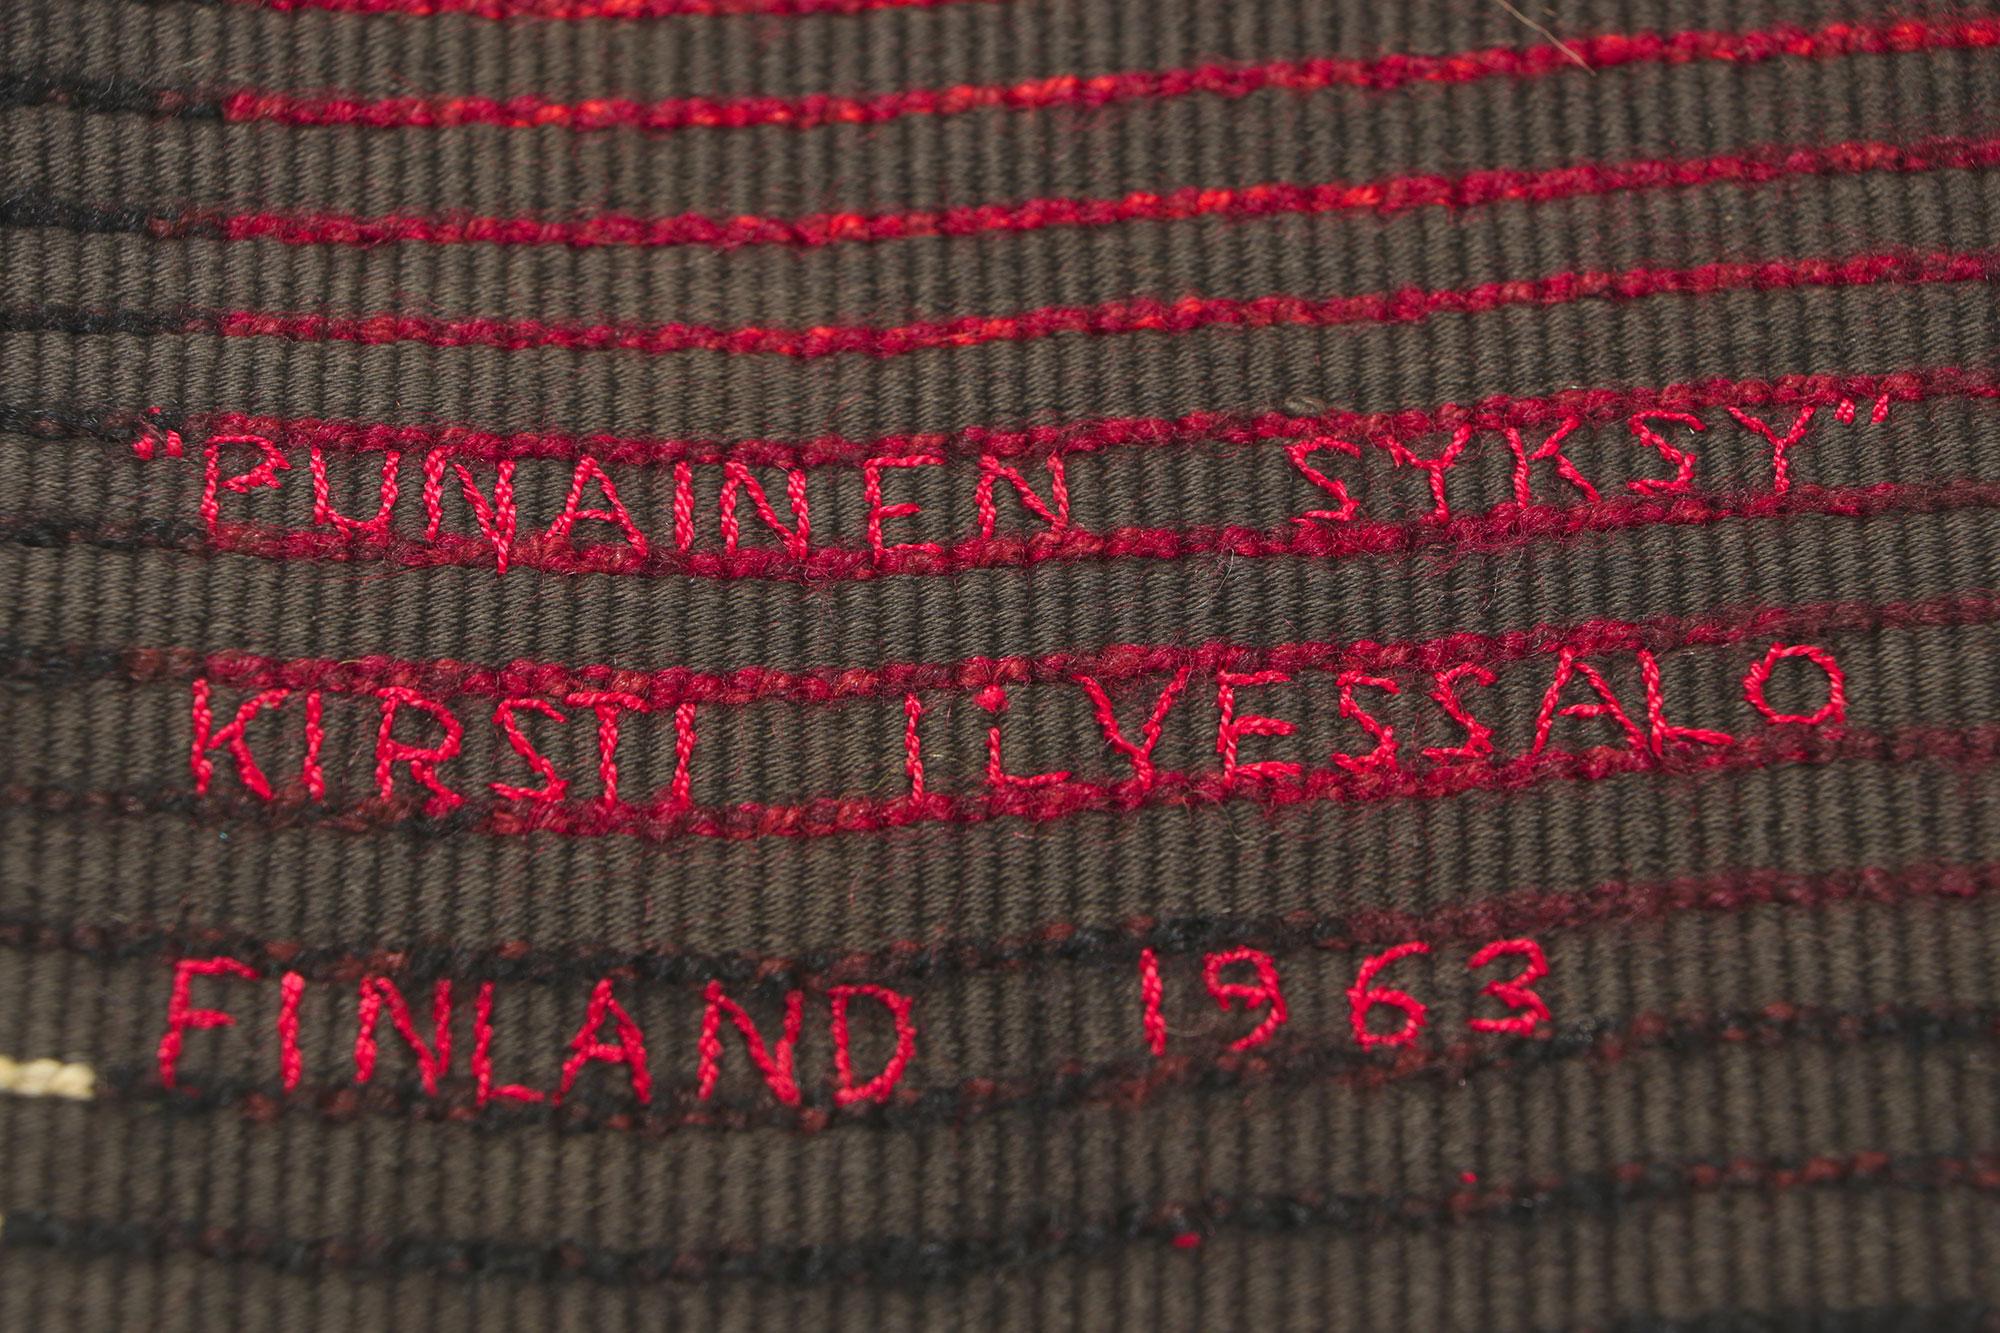 Hand-Knotted Signed 1963 Kirsti Ilvessalo Finnish Ryijy Carpet, Punainen Syksy Red Autumn For Sale